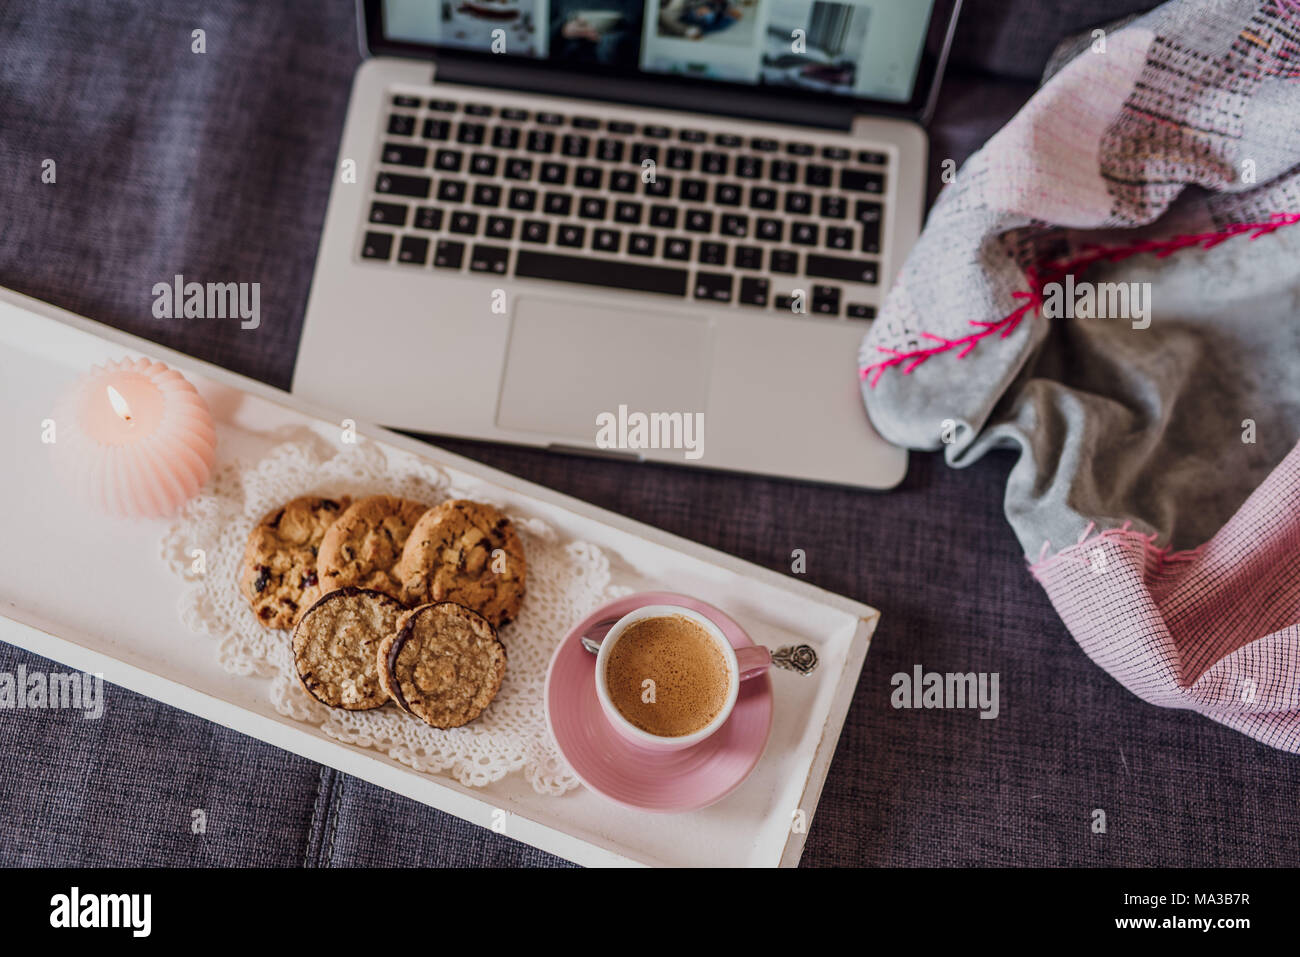 Tray with coffee,biscuits and candle in front of laptop on couch Stock Photo